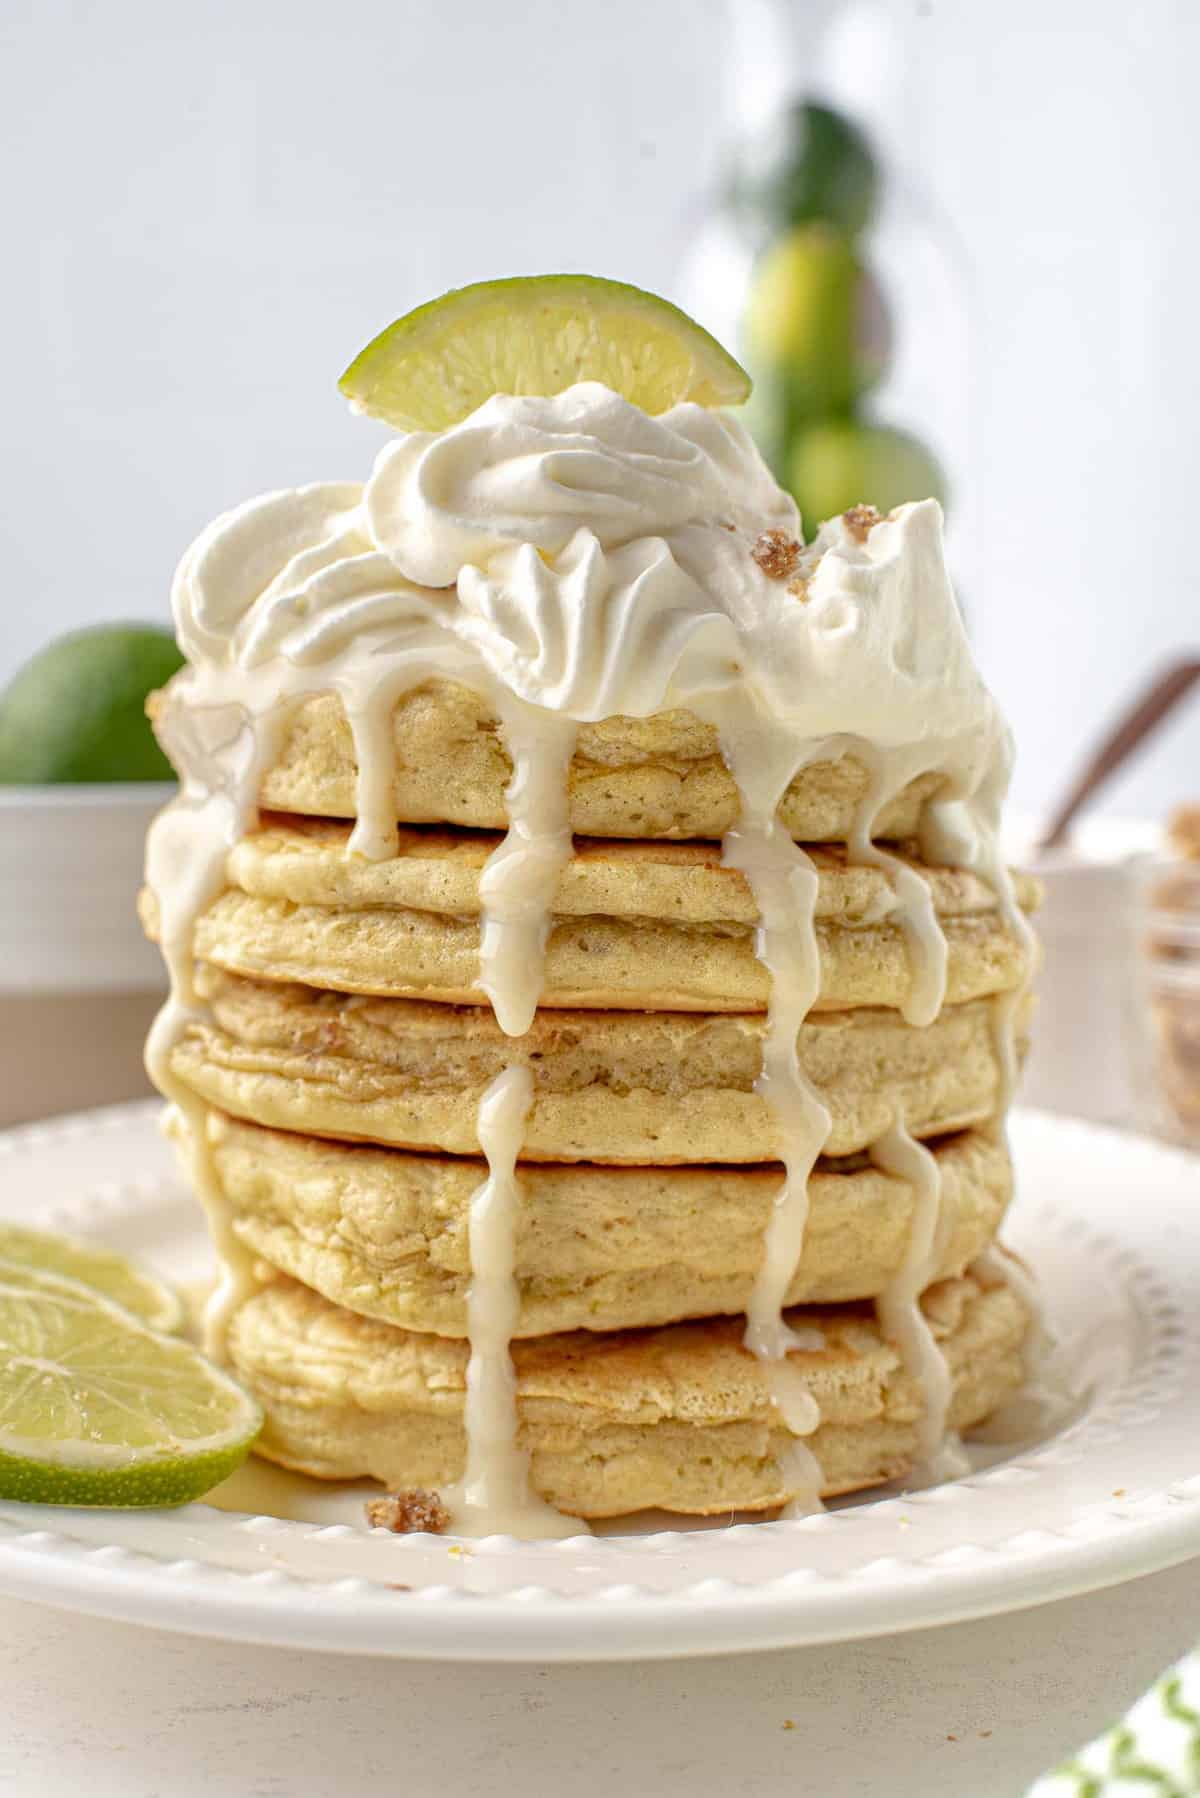 Tall stack of pancakes topped with whipped cream and dripping with lime syrup.